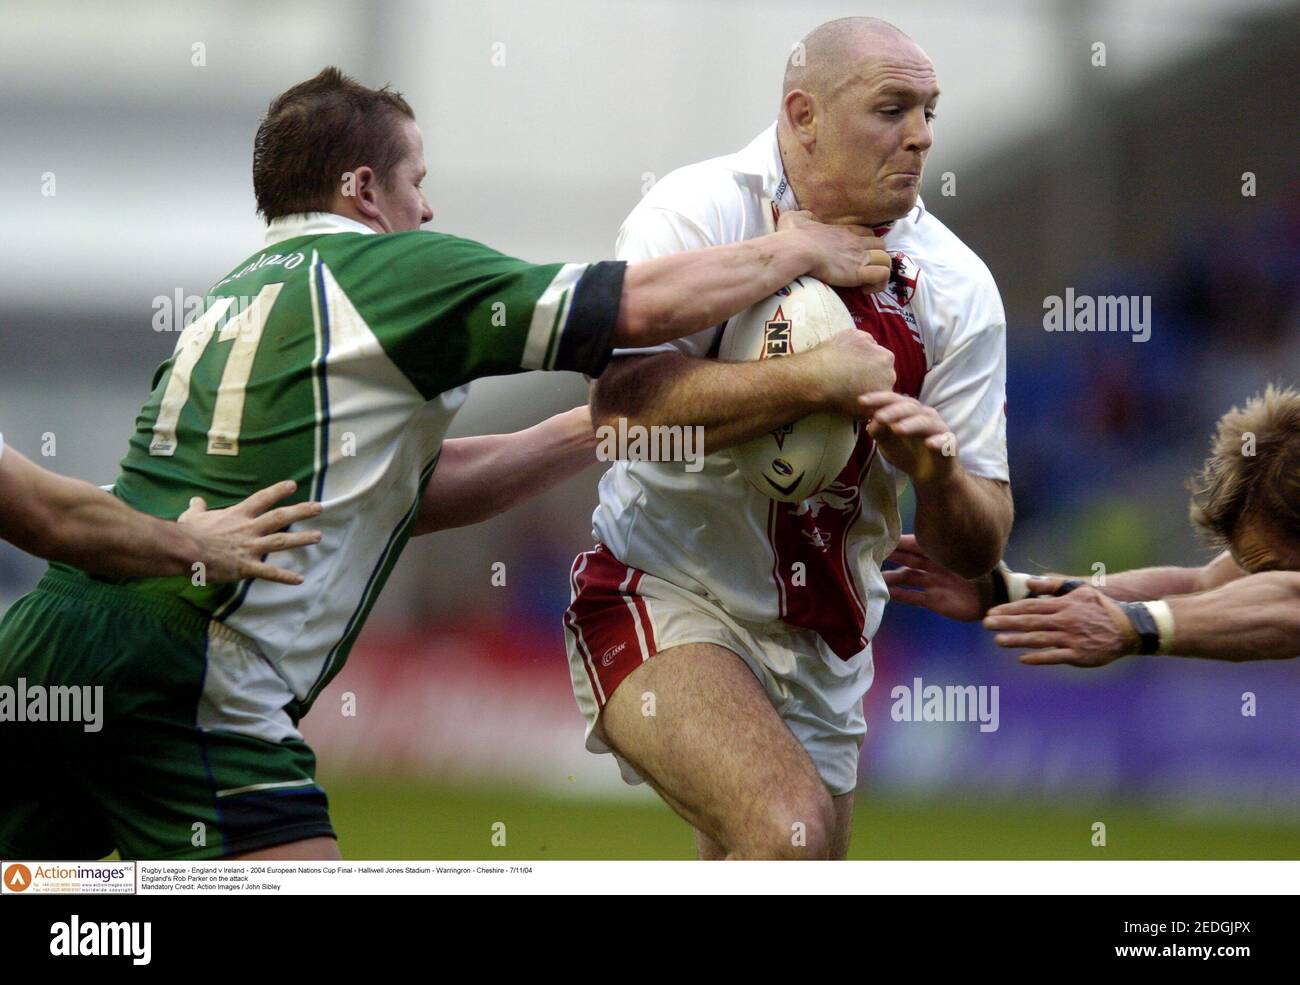 Rugby League - England v Ireland - 2004 European Nations Cup Final - Halliwell Jones Stadium - Warringron - Cheshire - 7/11/04  England's Rob Parker on the attack  Mandatory Credit: Action Images / John Sibley Stock Photo